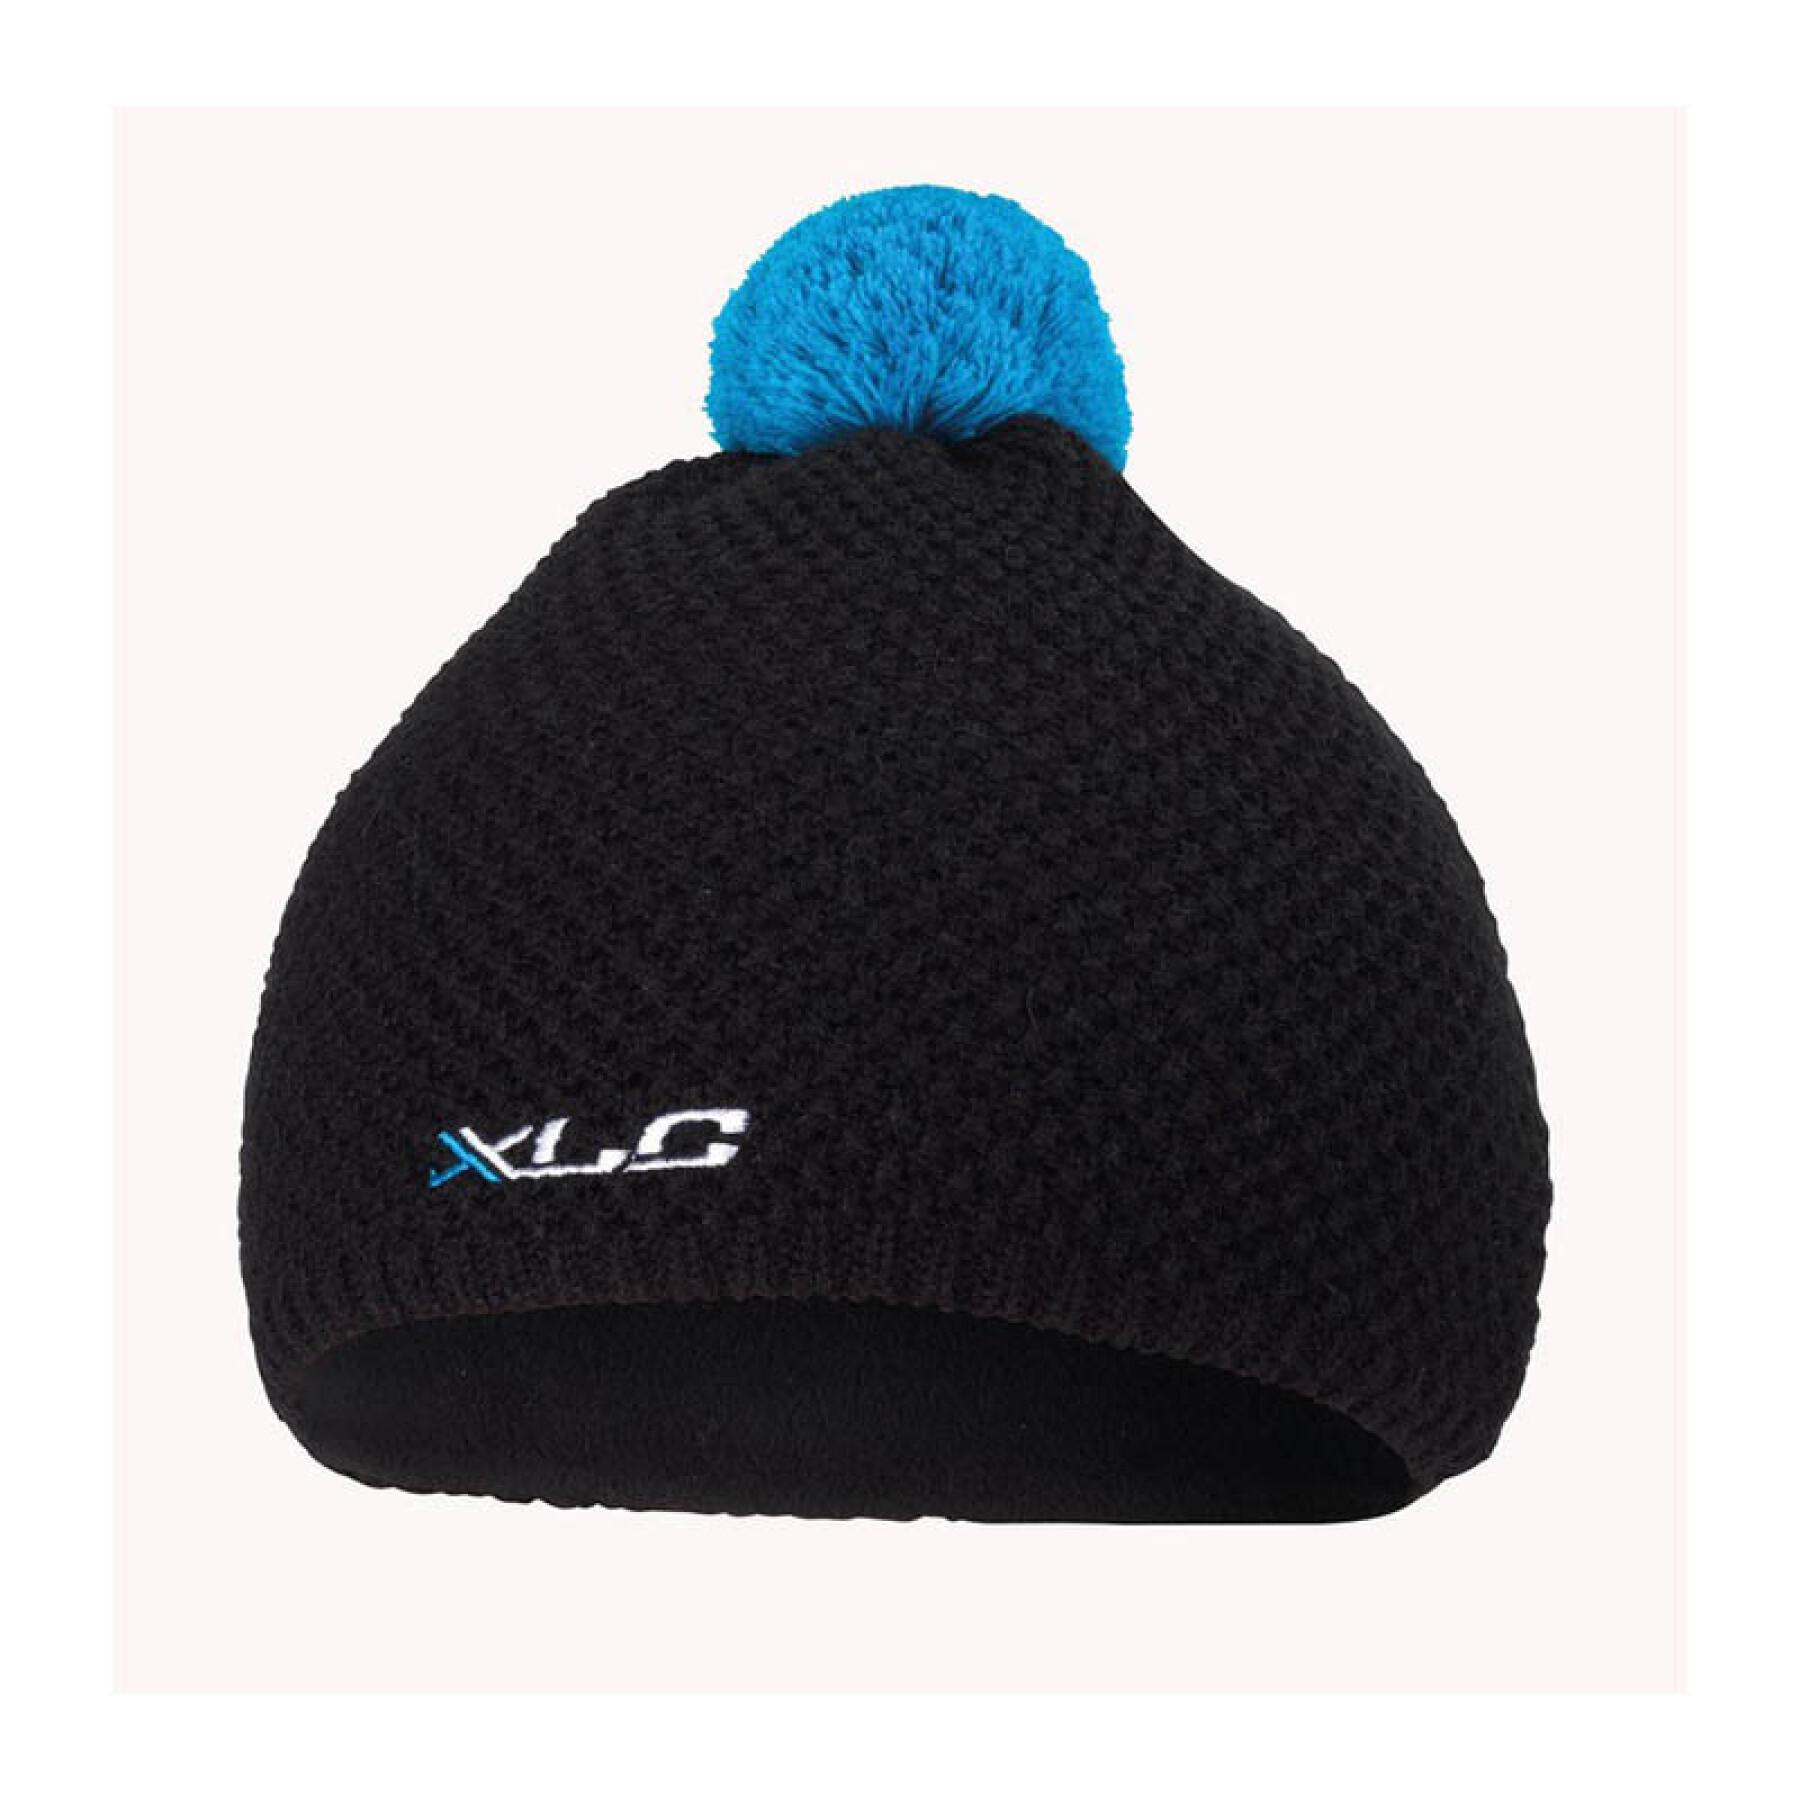 Knitted hat XLC bh-h04